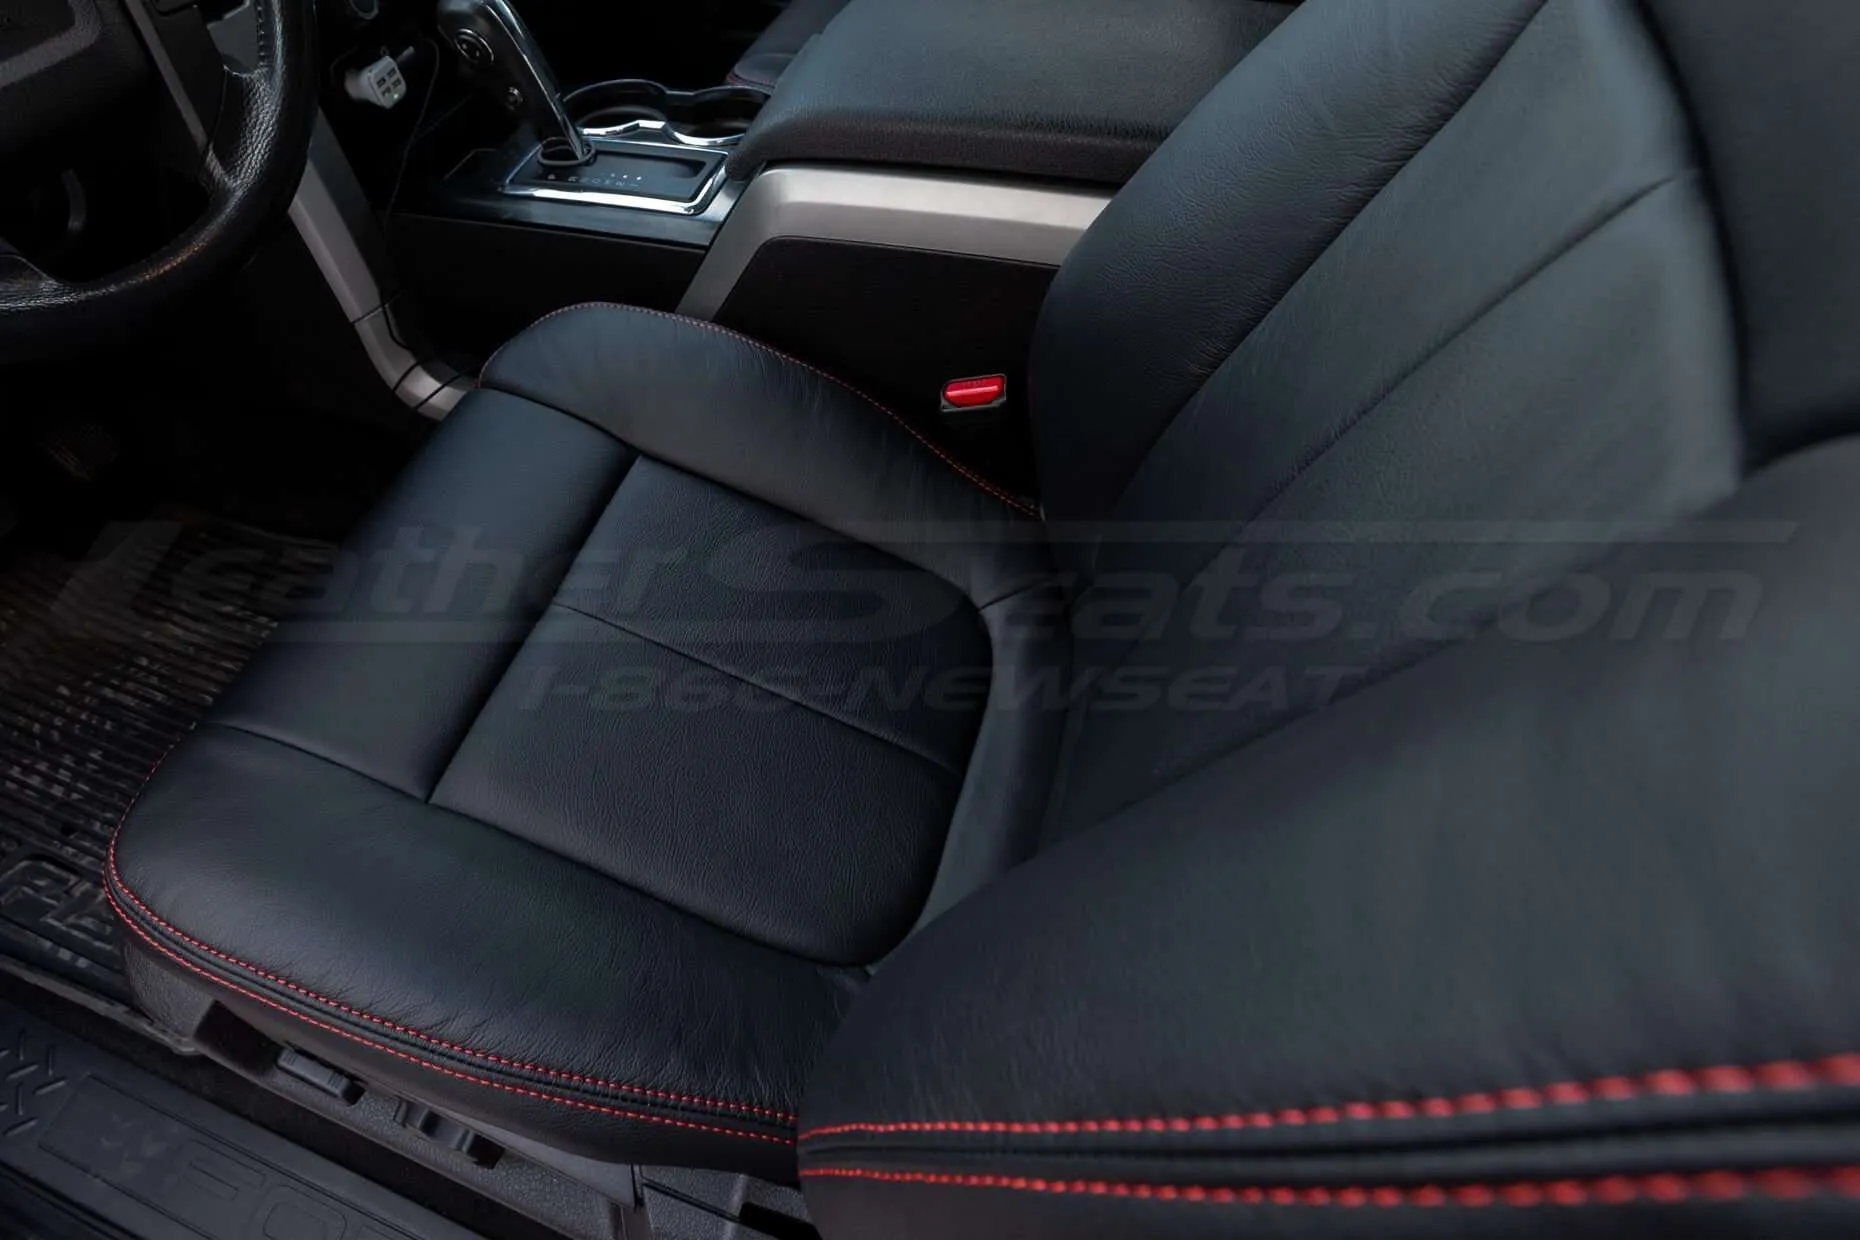 Ford F-150 Leather Seats - Black - View of seat from top down